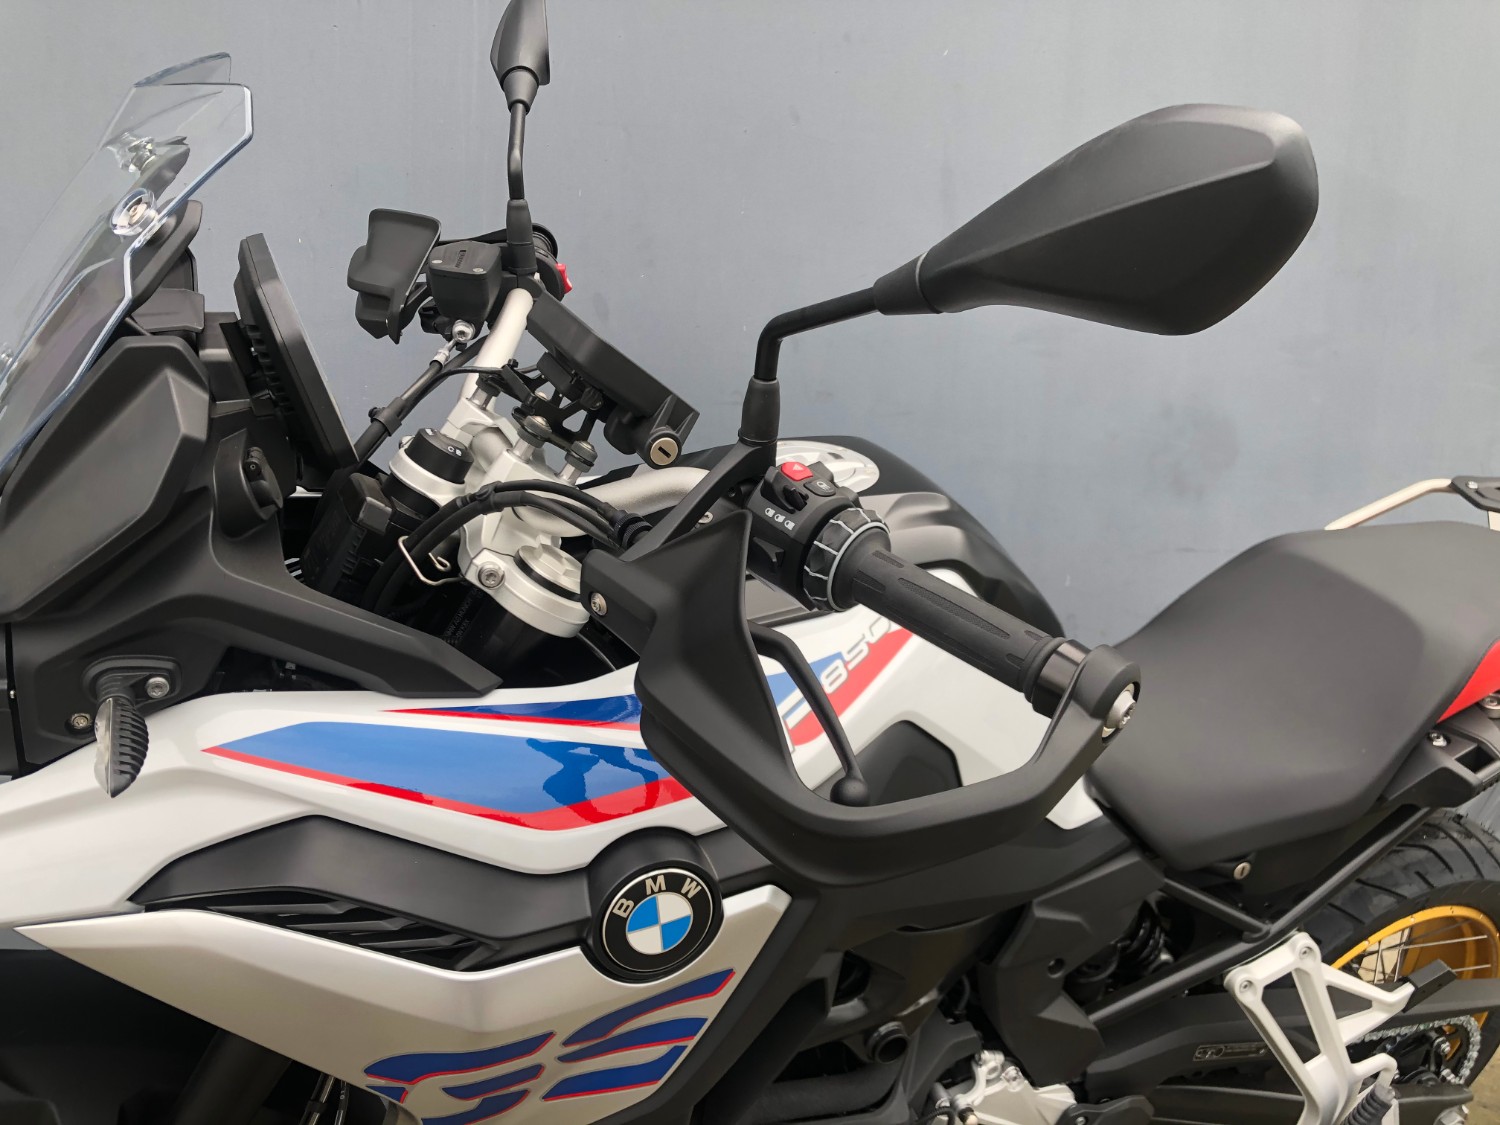 2019 BMW F850GS RallyE Low Suspension Motorcycle Image 15